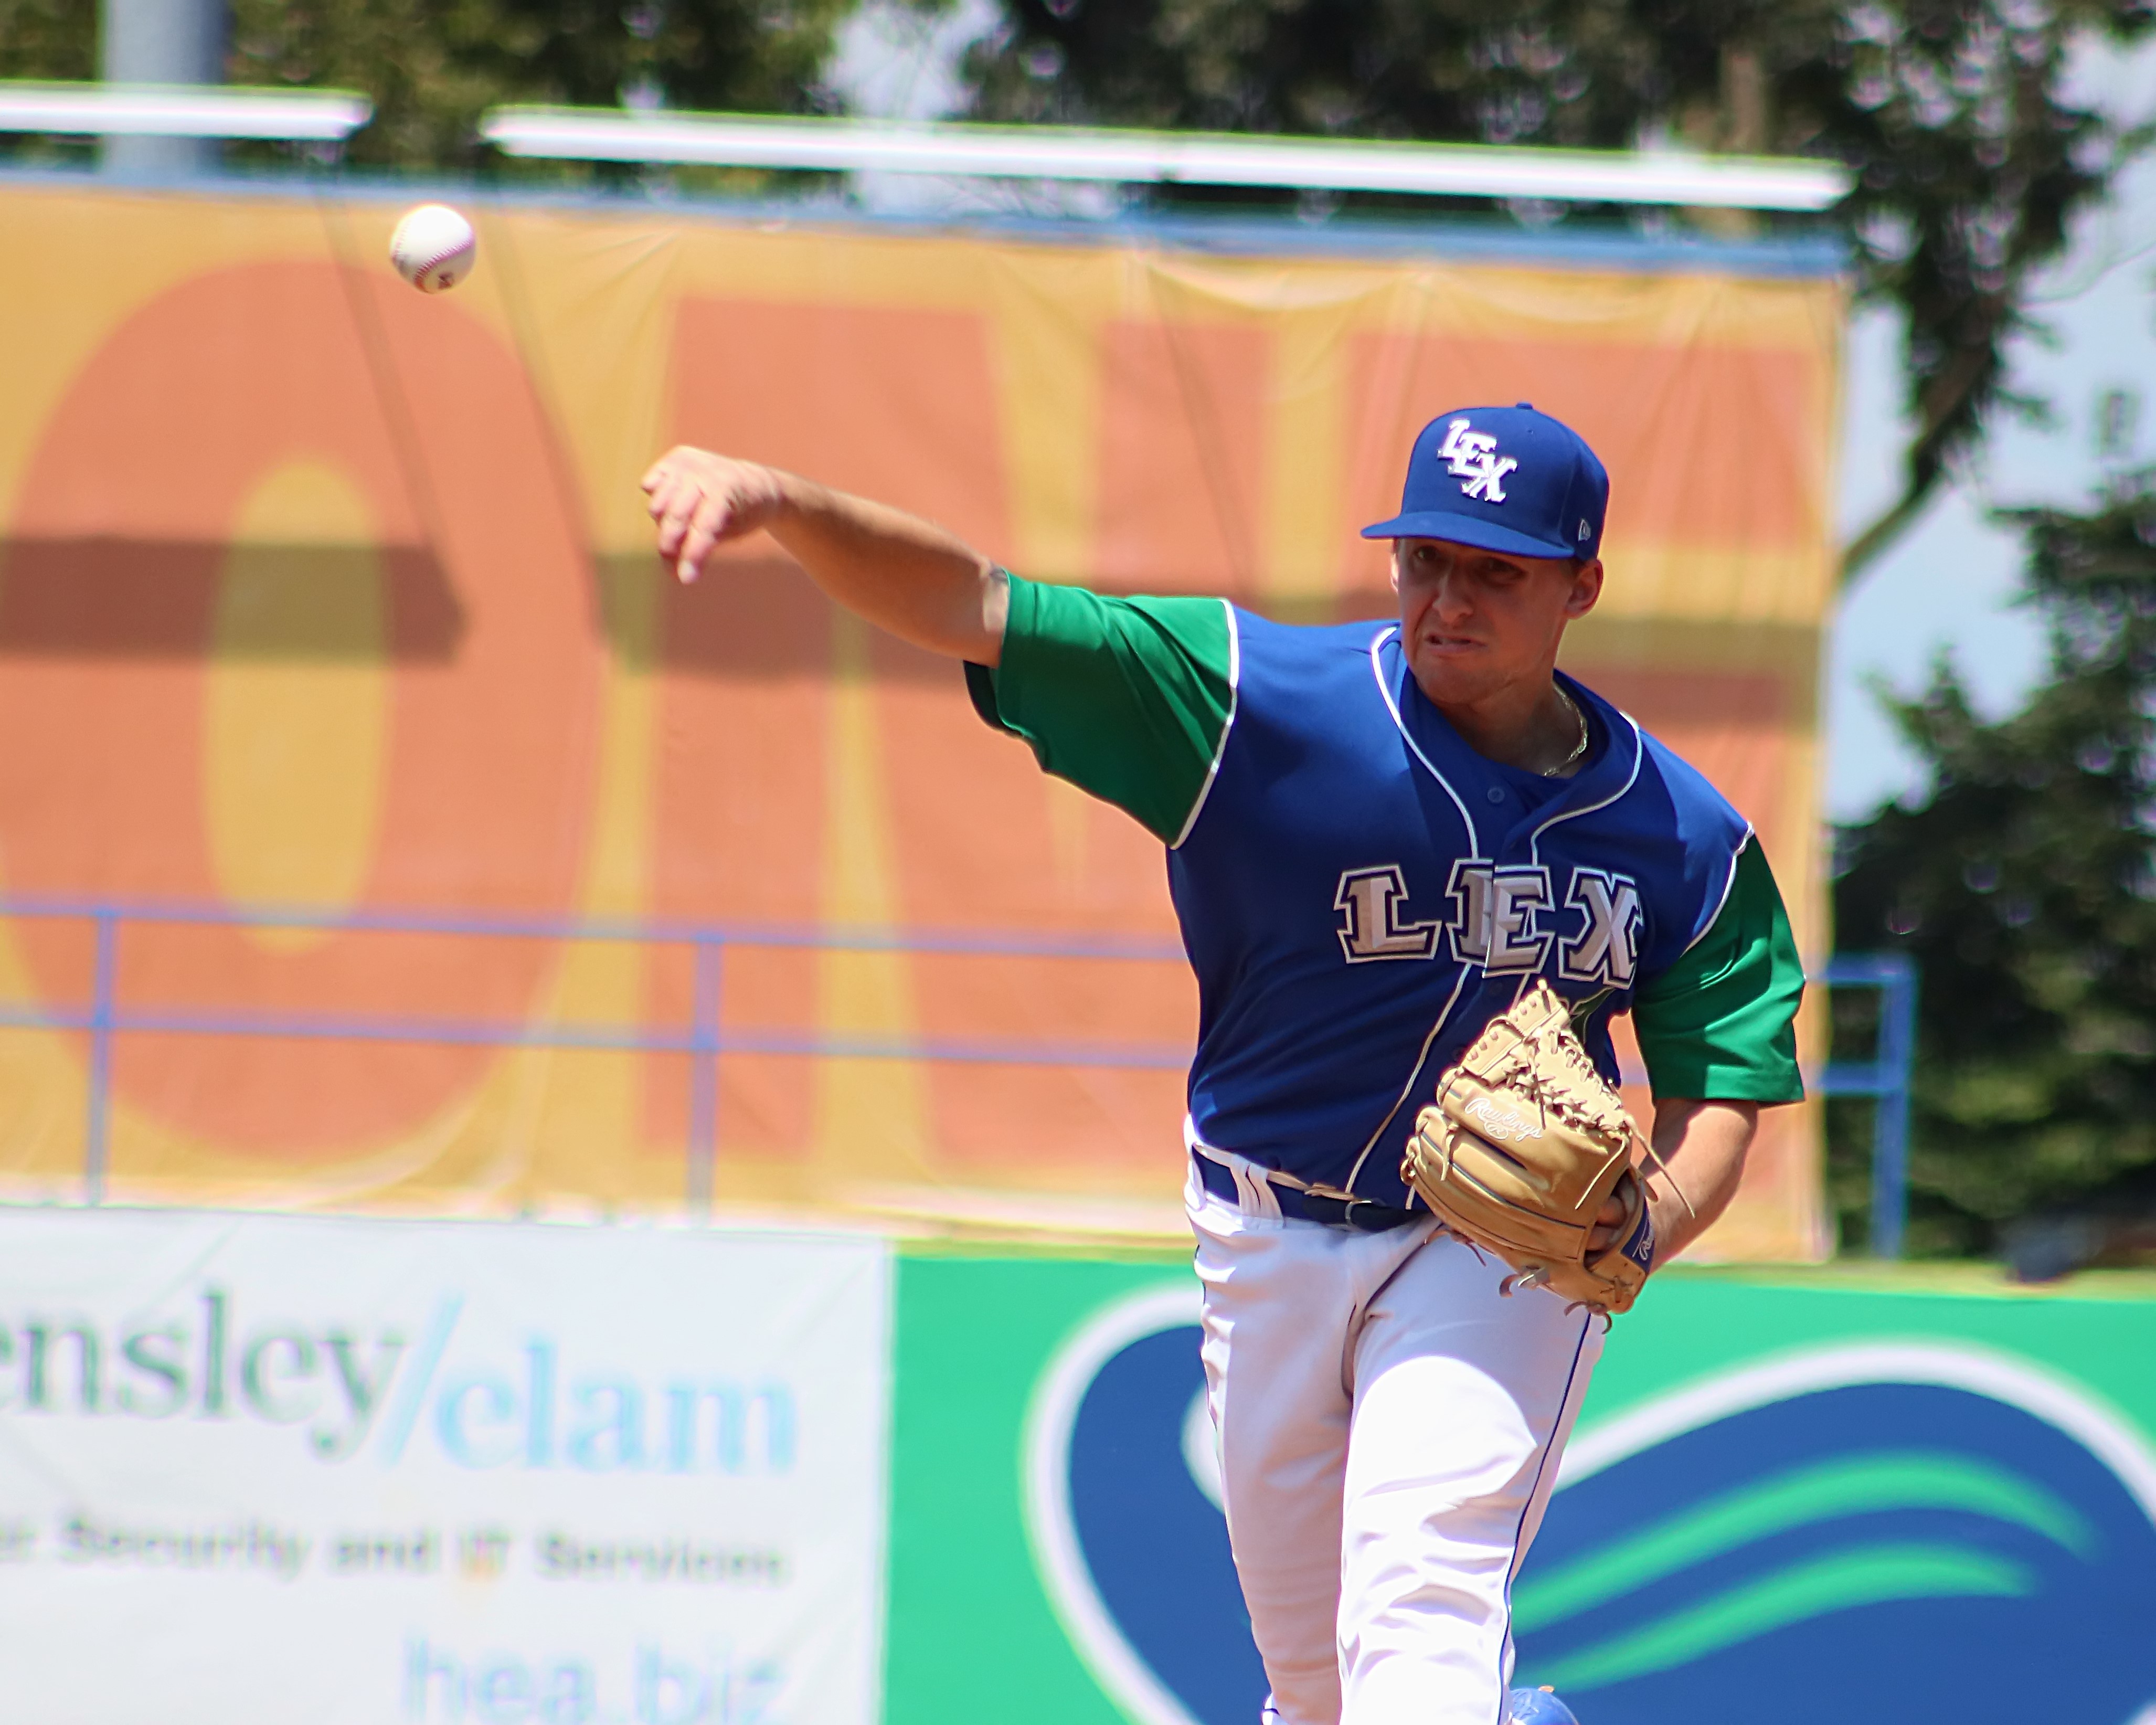 Charlie Neuweiler, RHP, Lexington Legends, Delivers2-frontal view_filtered